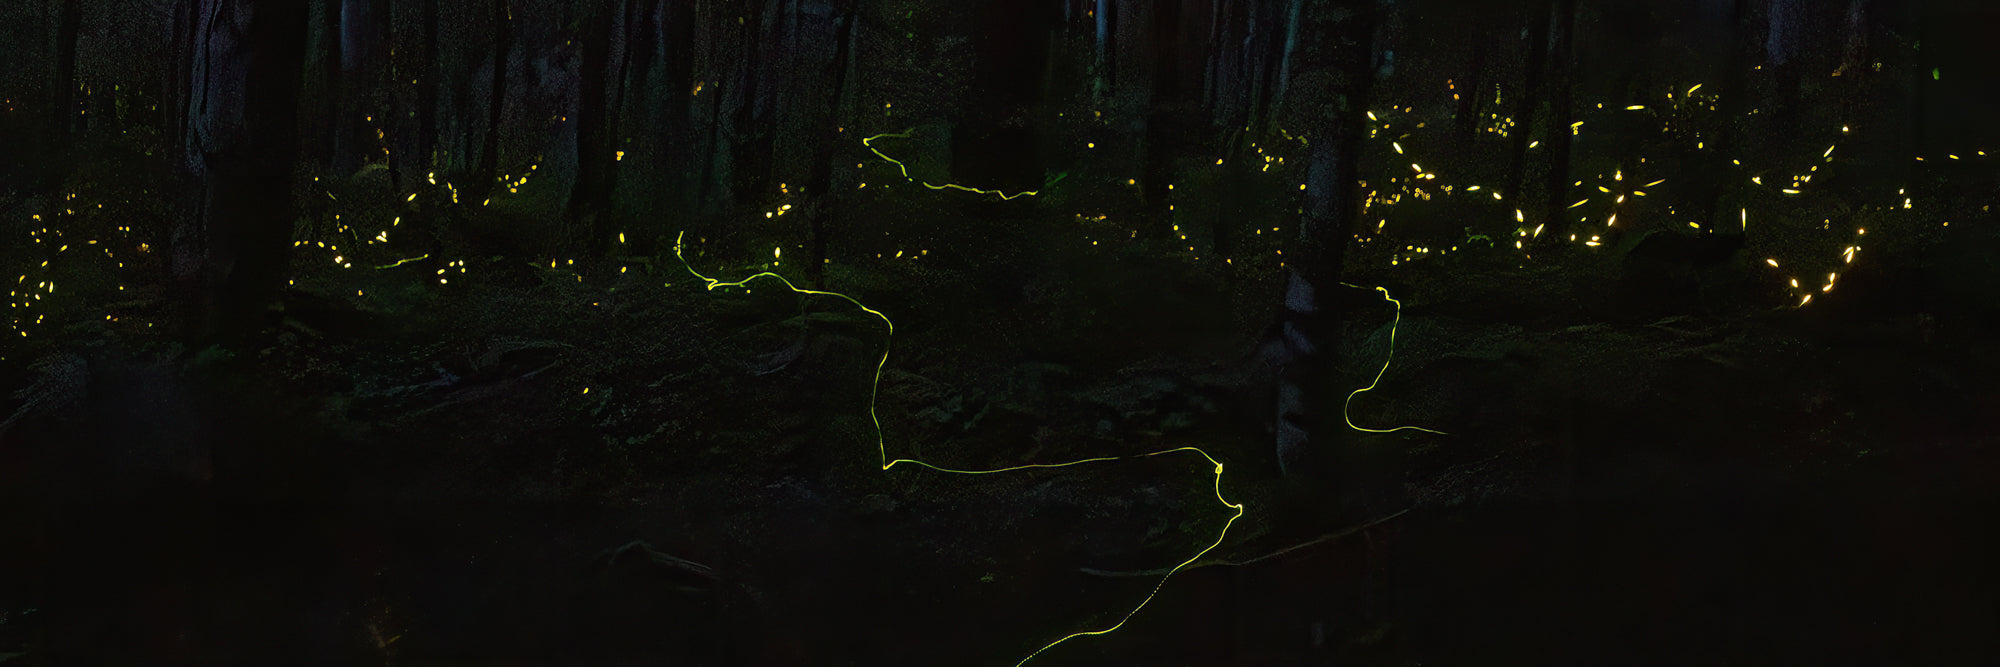 Synchronous Fireflies 2025 Guided 3-Day Trip Deposit